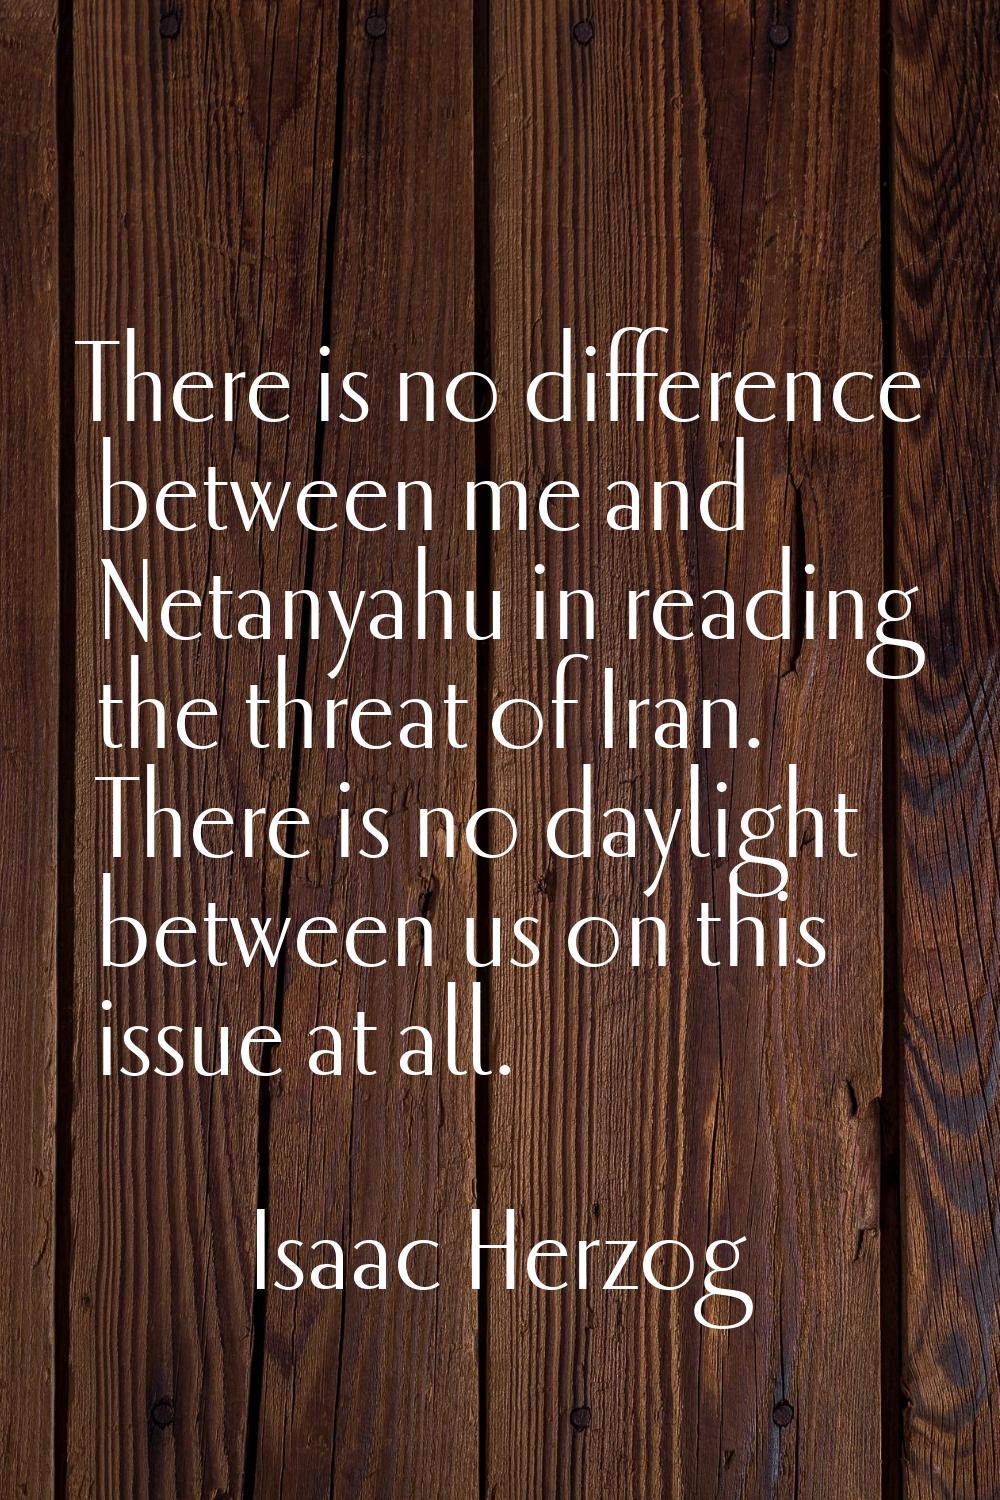 There is no difference between me and Netanyahu in reading the threat of Iran. There is no daylight